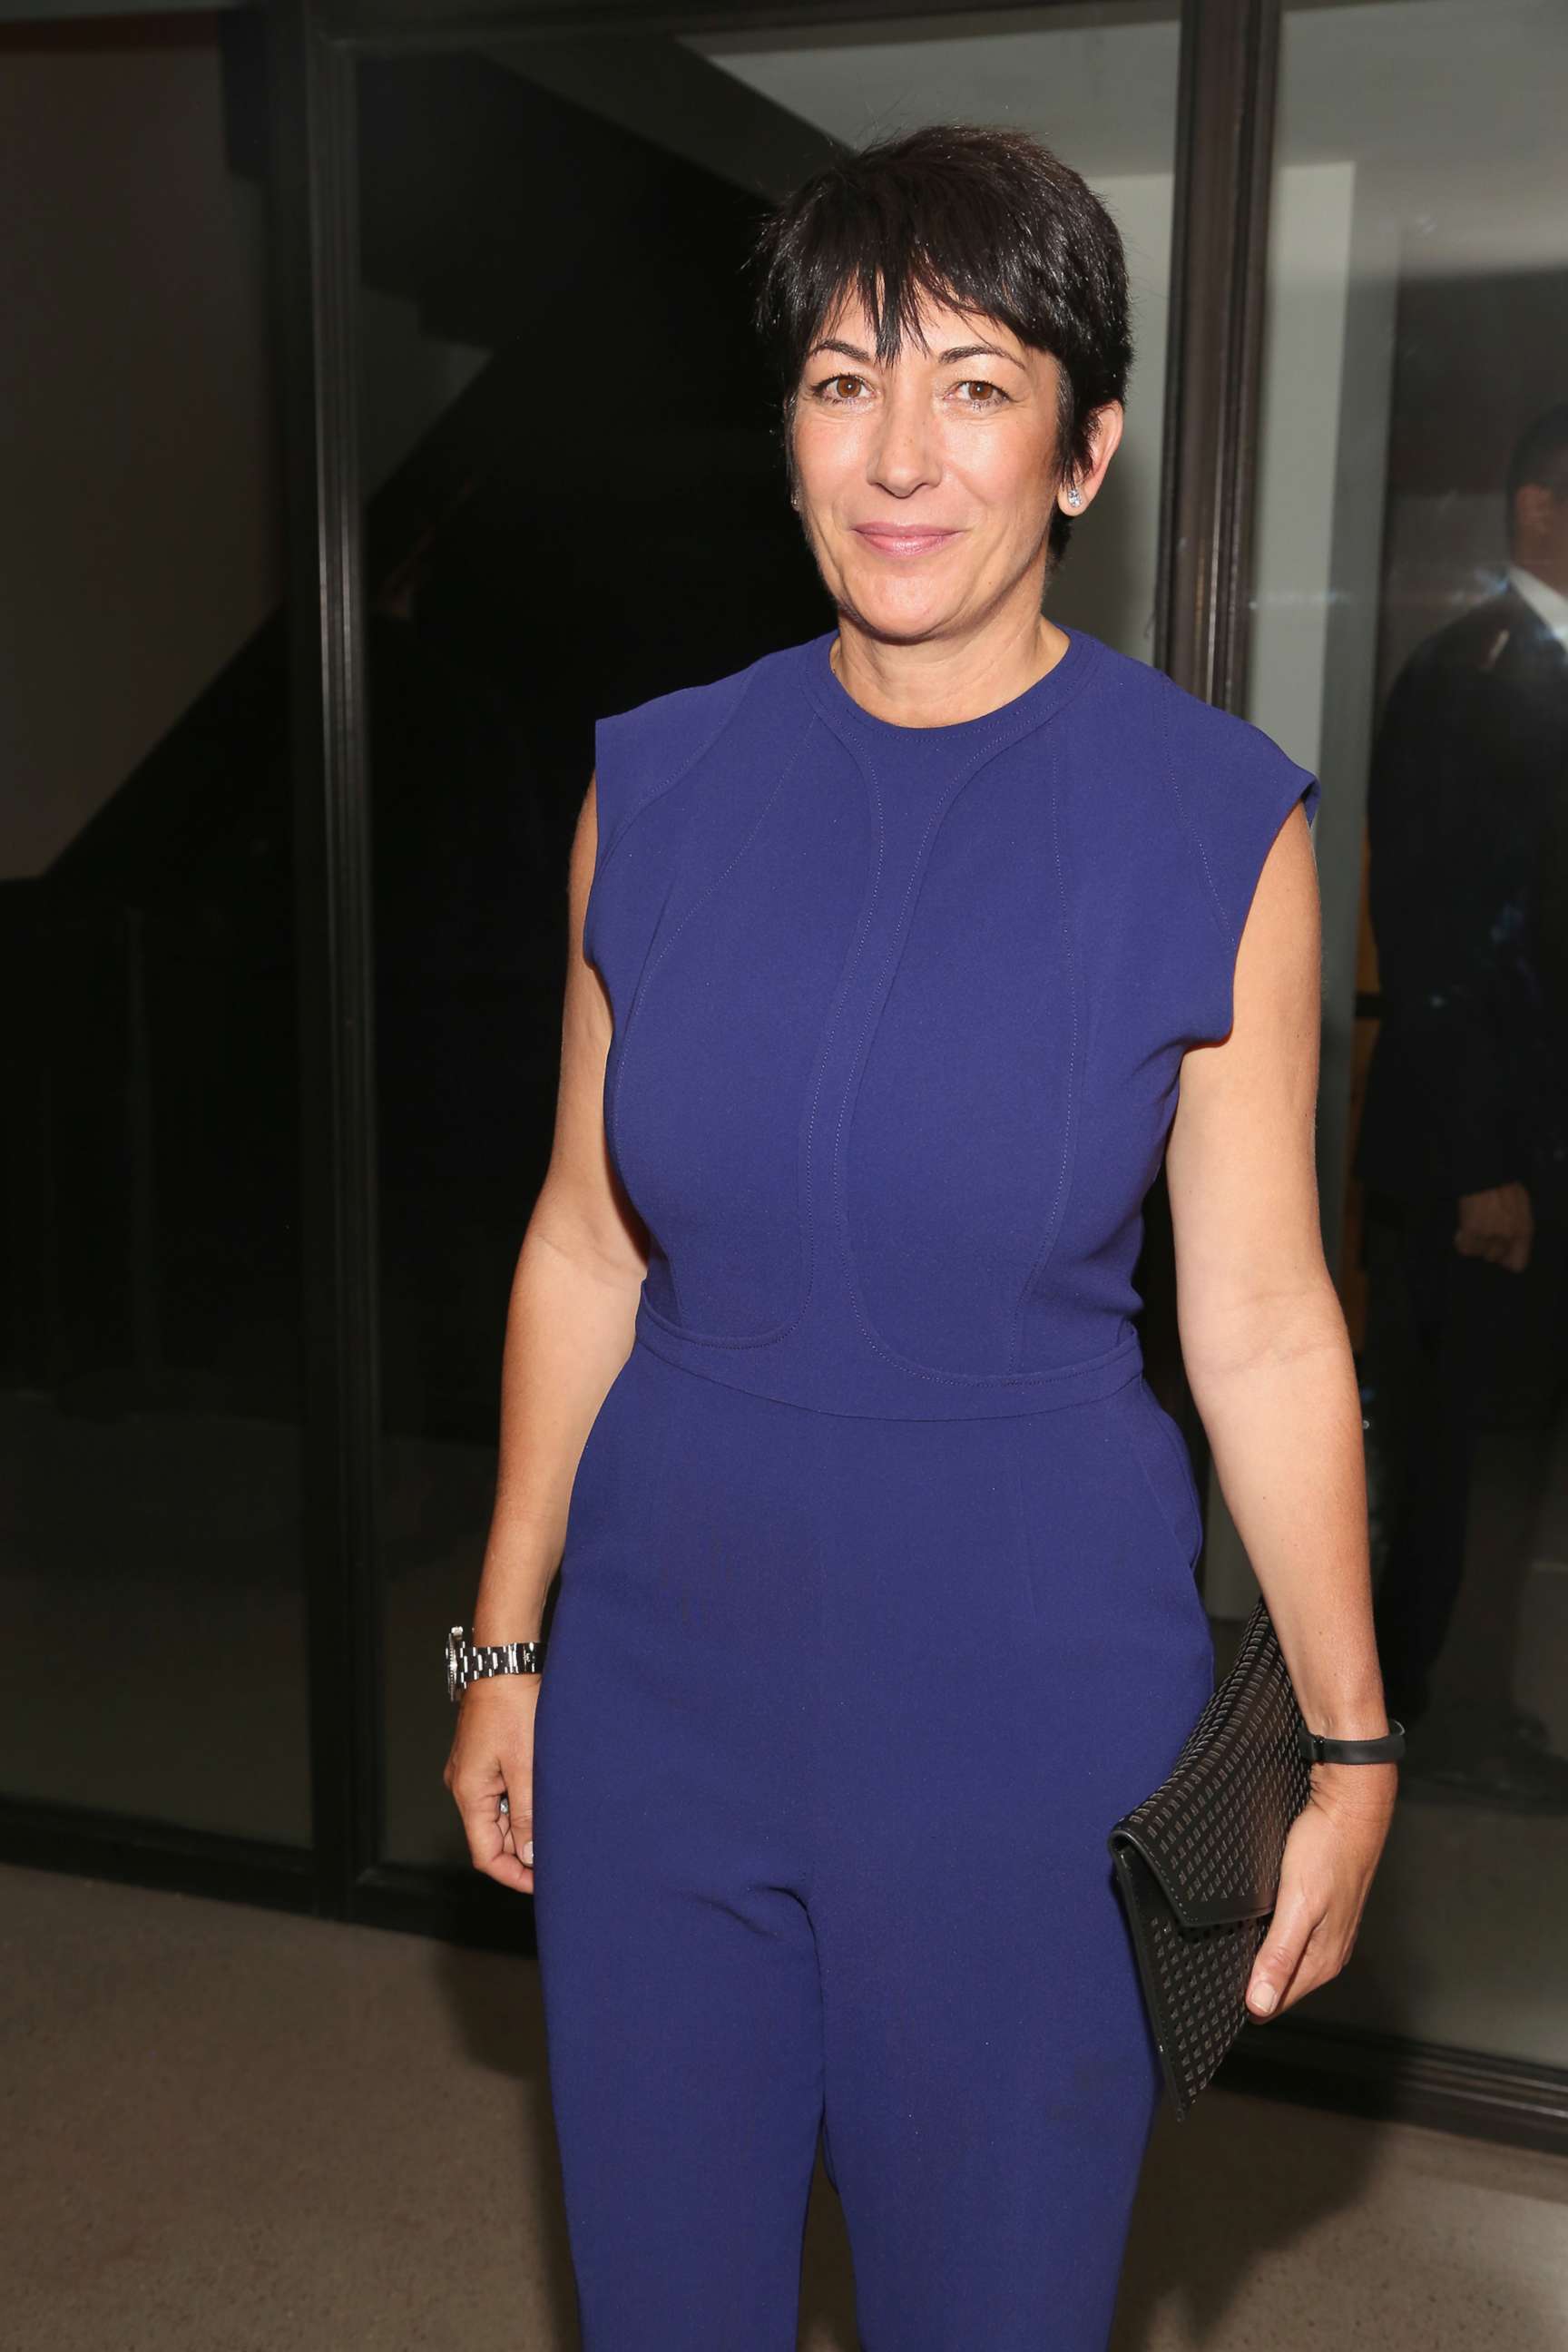 PHOTO: Ghislaine Maxwell attends an event in New York, Oct. 18, 2016.